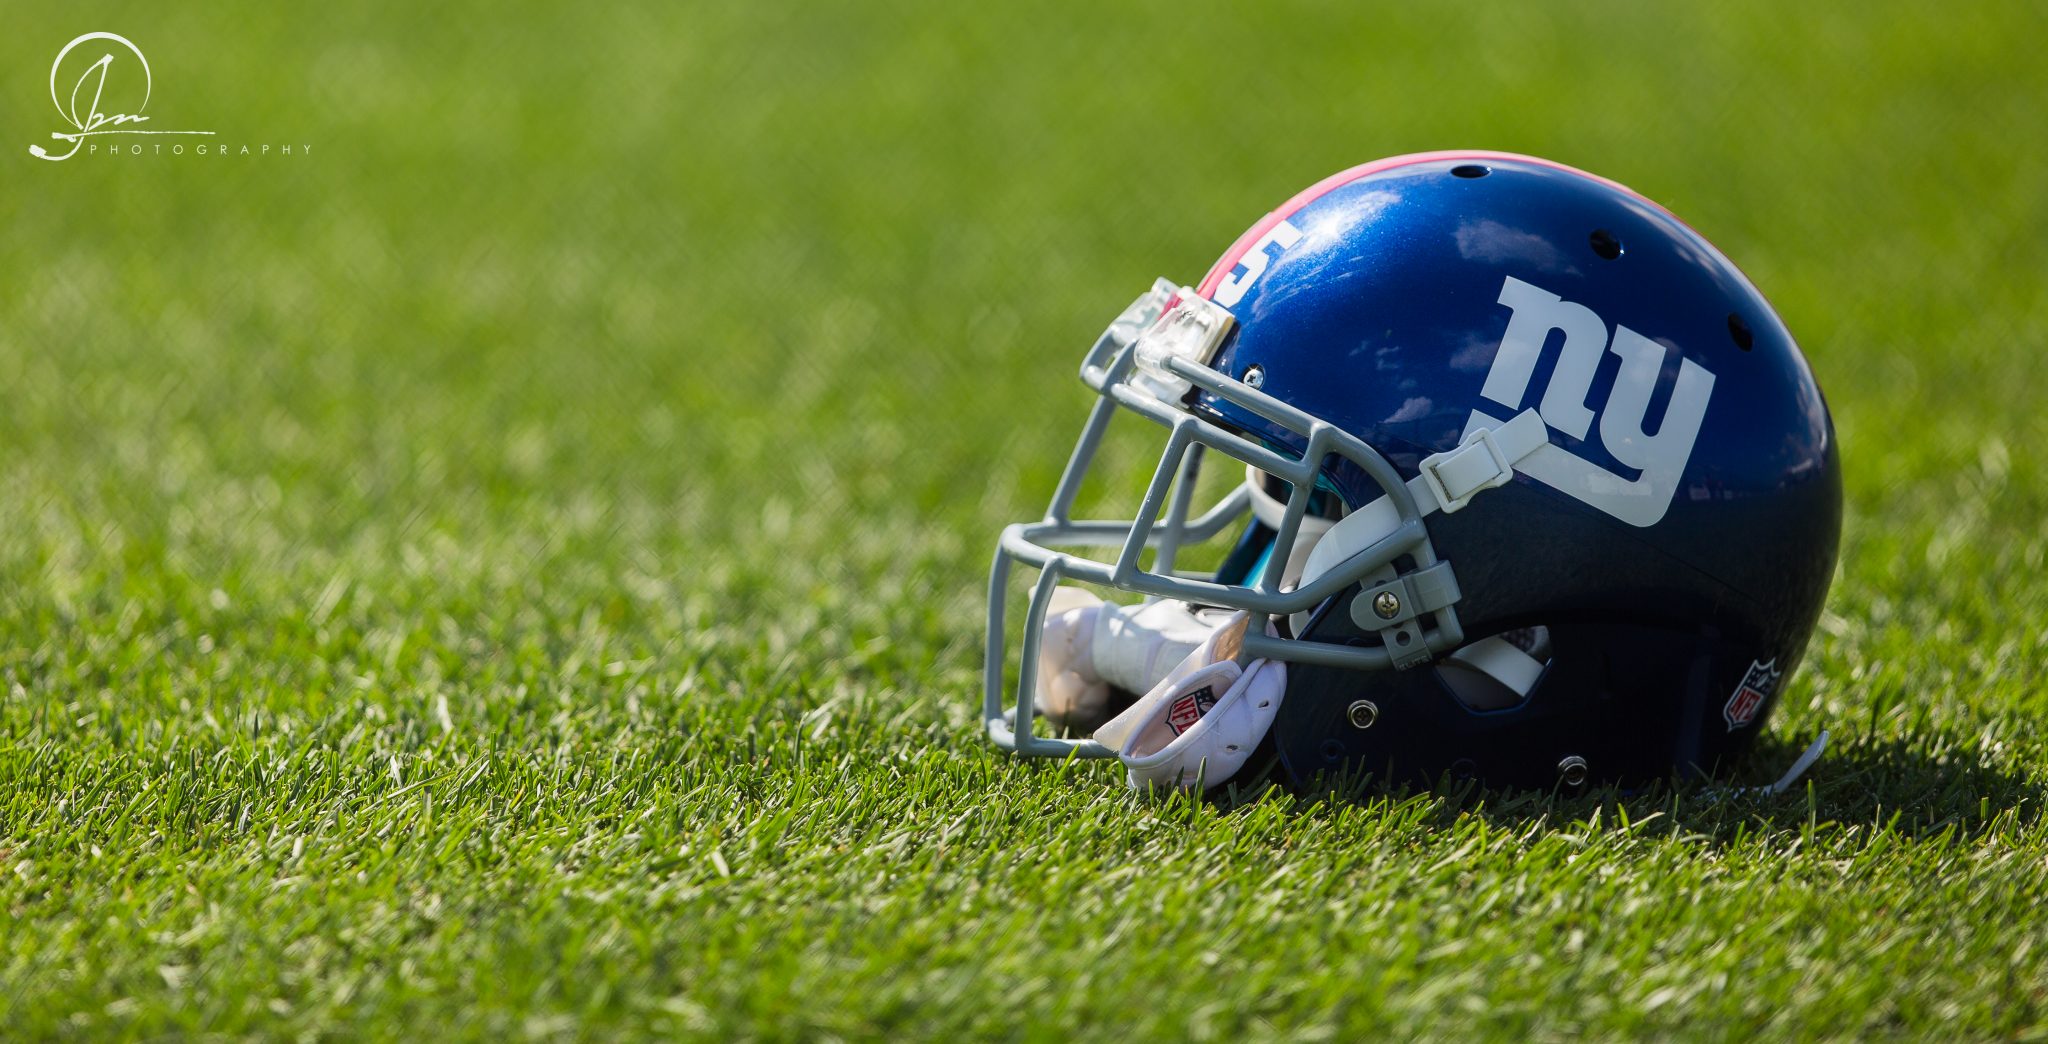 The Giants Search For New Leadership